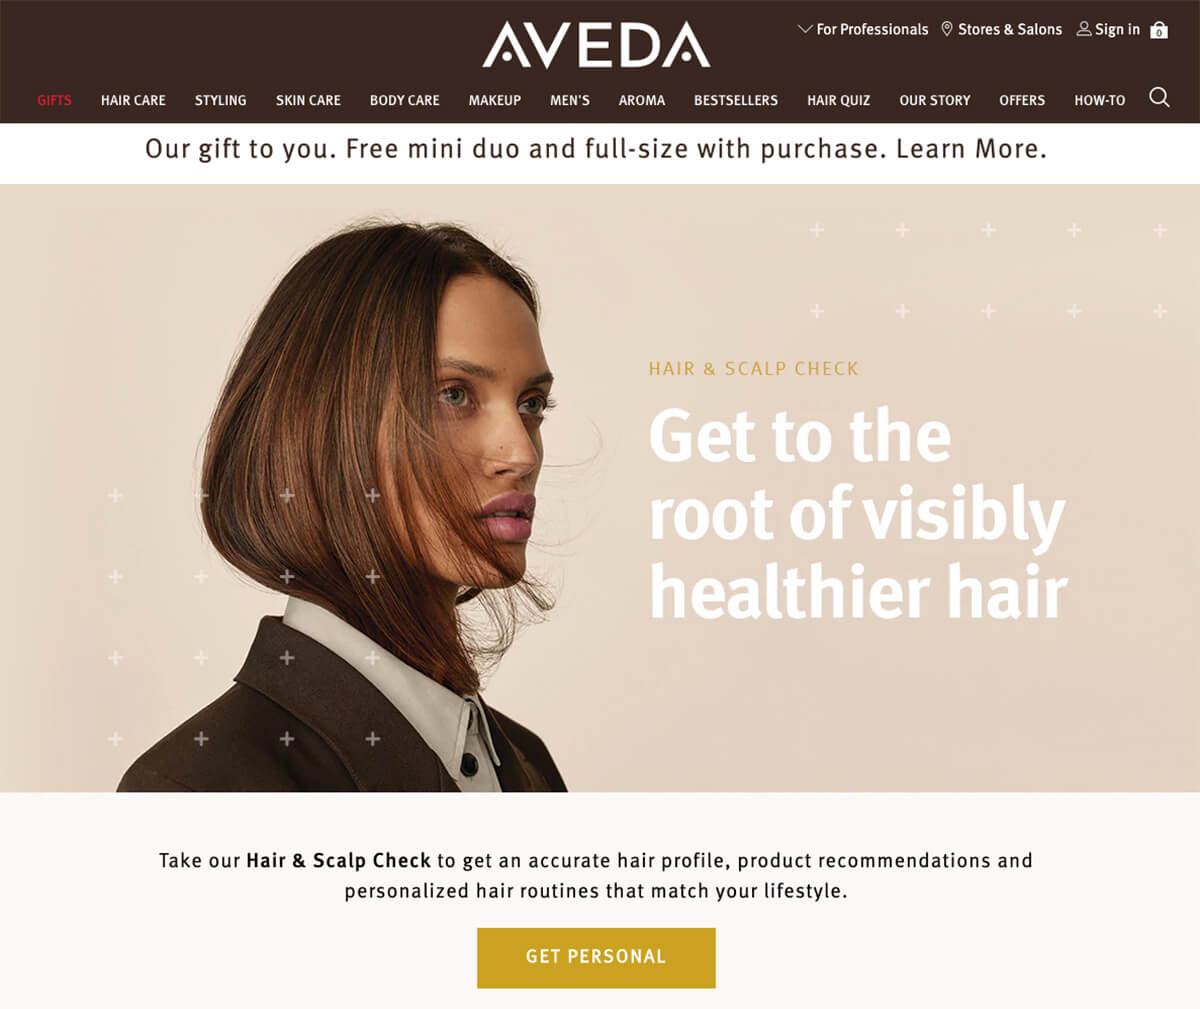 Content personalization example - Aveda